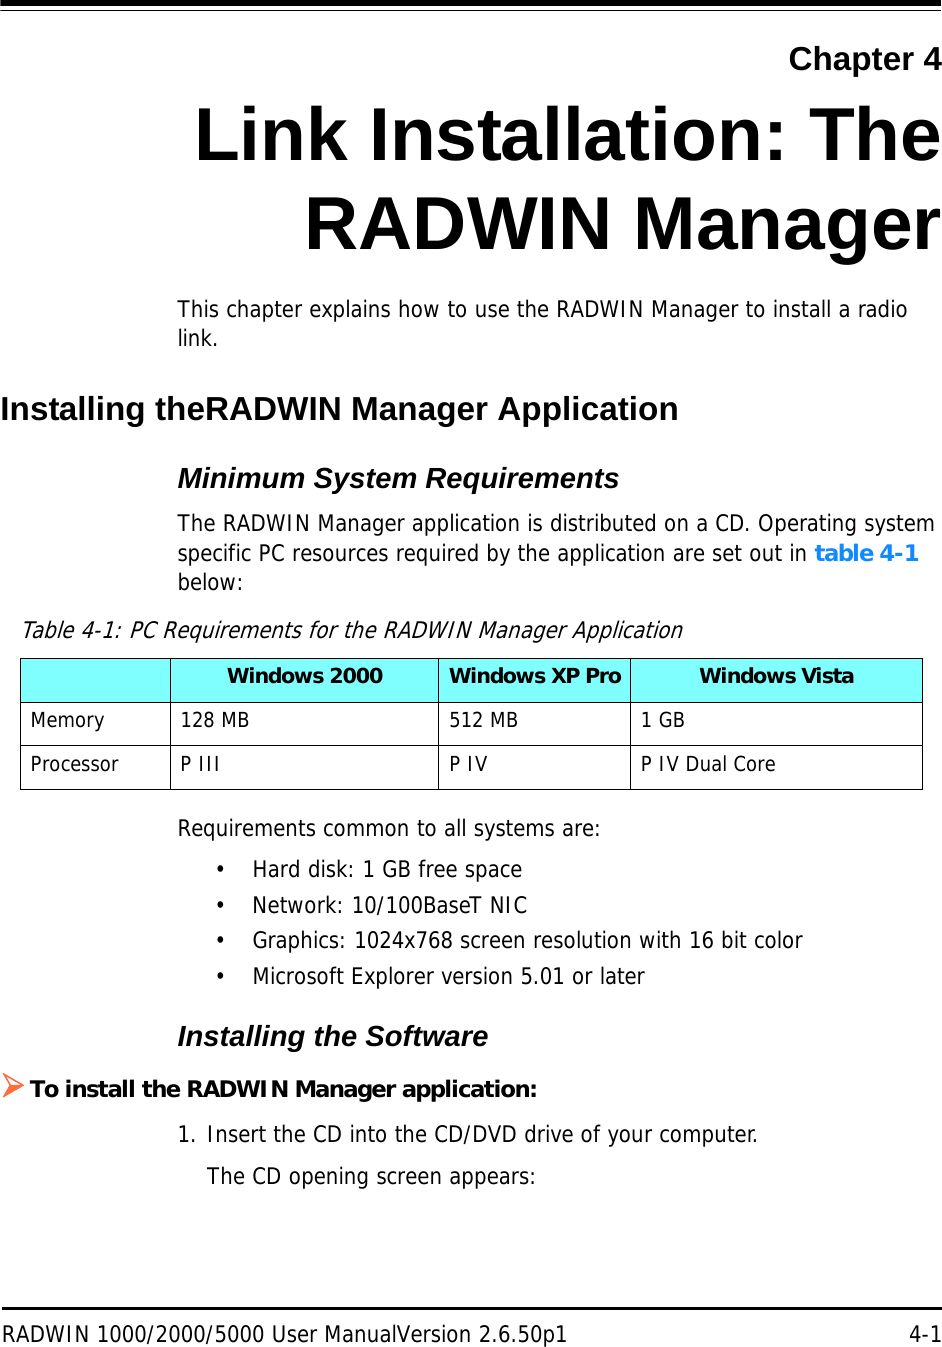 RADWIN 1000/2000/5000 User ManualVersion 2.6.50p1 4-1Chapter 4Link Installation: TheRADWIN ManagerThis chapter explains how to use the RADWIN Manager to install a radio link.Installing theRADWIN Manager ApplicationMinimum System RequirementsThe RADWIN Manager application is distributed on a CD. Operating system specific PC resources required by the application are set out in table 4-1 below:Requirements common to all systems are:• Hard disk: 1 GB free space• Network: 10/100BaseT NIC• Graphics: 1024x768 screen resolution with 16 bit color• Microsoft Explorer version 5.01 or laterInstalling the SoftwareTo install the RADWIN Manager application:1. Insert the CD into the CD/DVD drive of your computer.The CD opening screen appears:Table 4-1: PC Requirements for the RADWIN Manager ApplicationWindows 2000 Windows XP Pro Windows VistaMemory 128 MB 512 MB 1 GBProcessor P III P IV P IV Dual Core